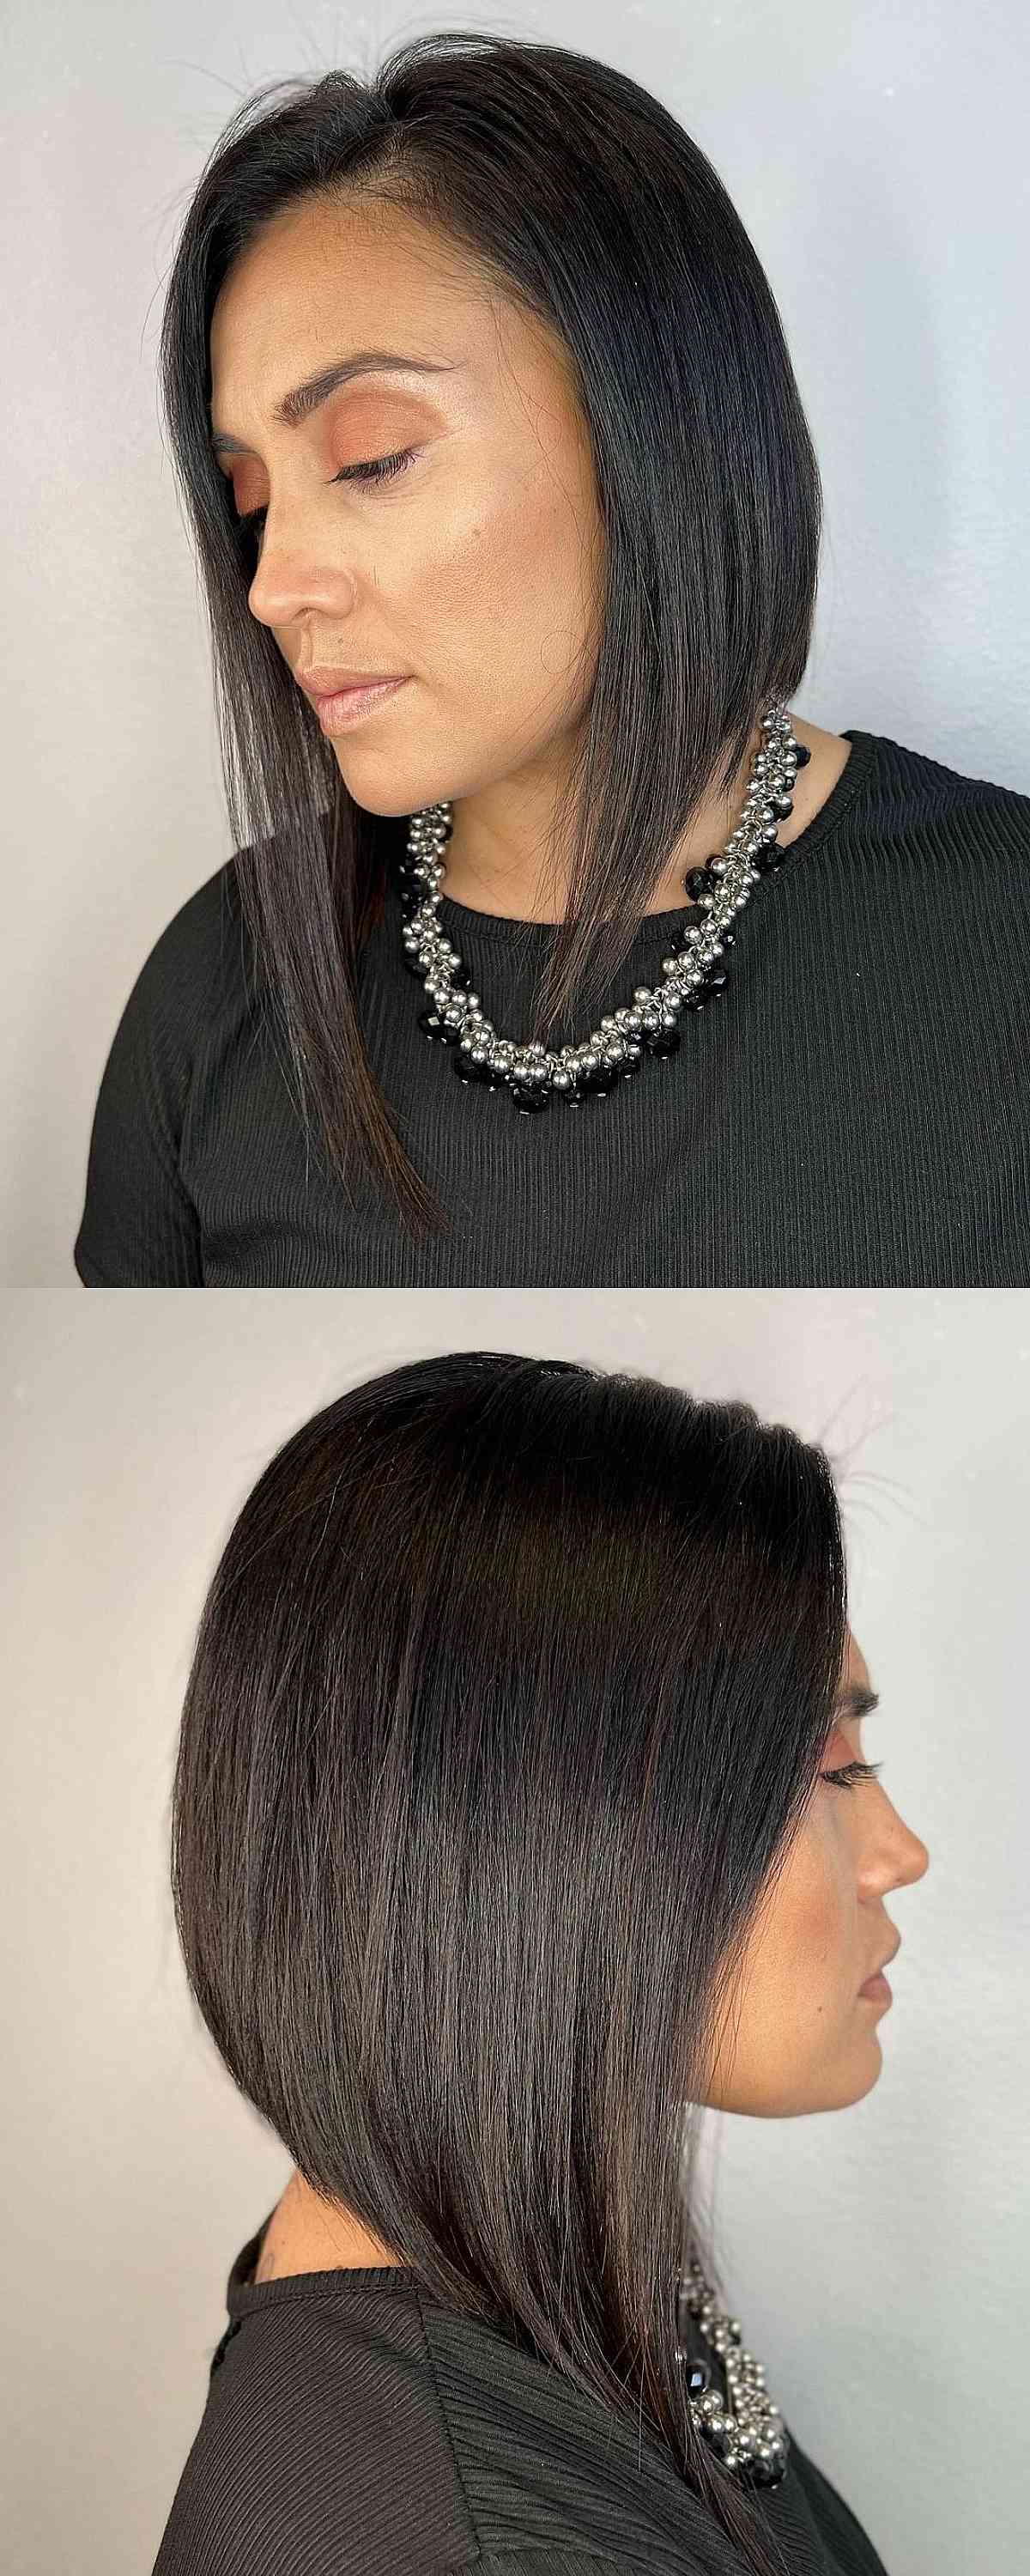 Classy and Professional A-Line Bob Hairstyle